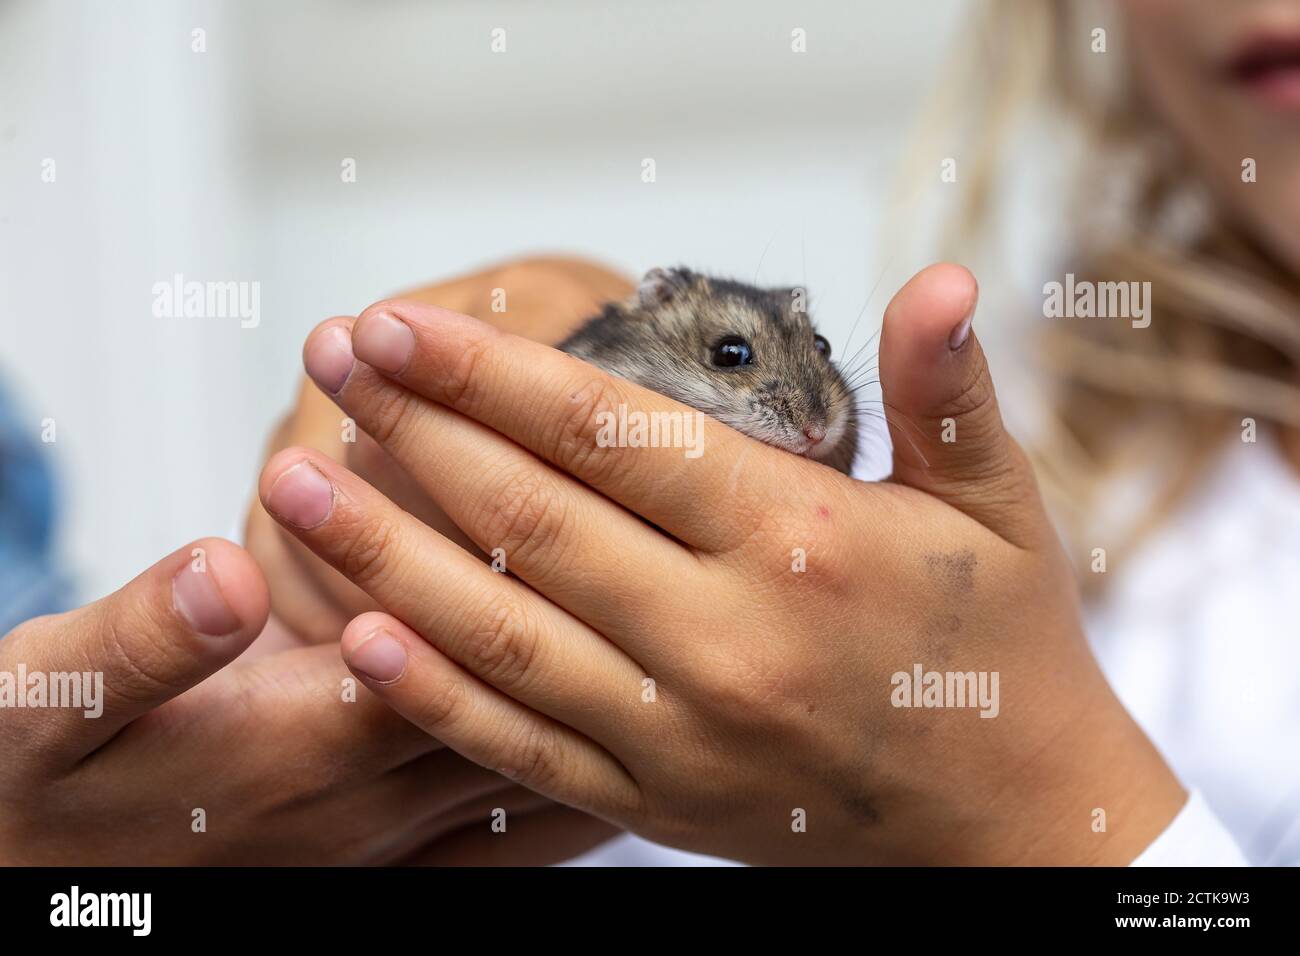 Man holding a tiny, beautiful hamster Stock Photo by ©fantom_rd 100965504